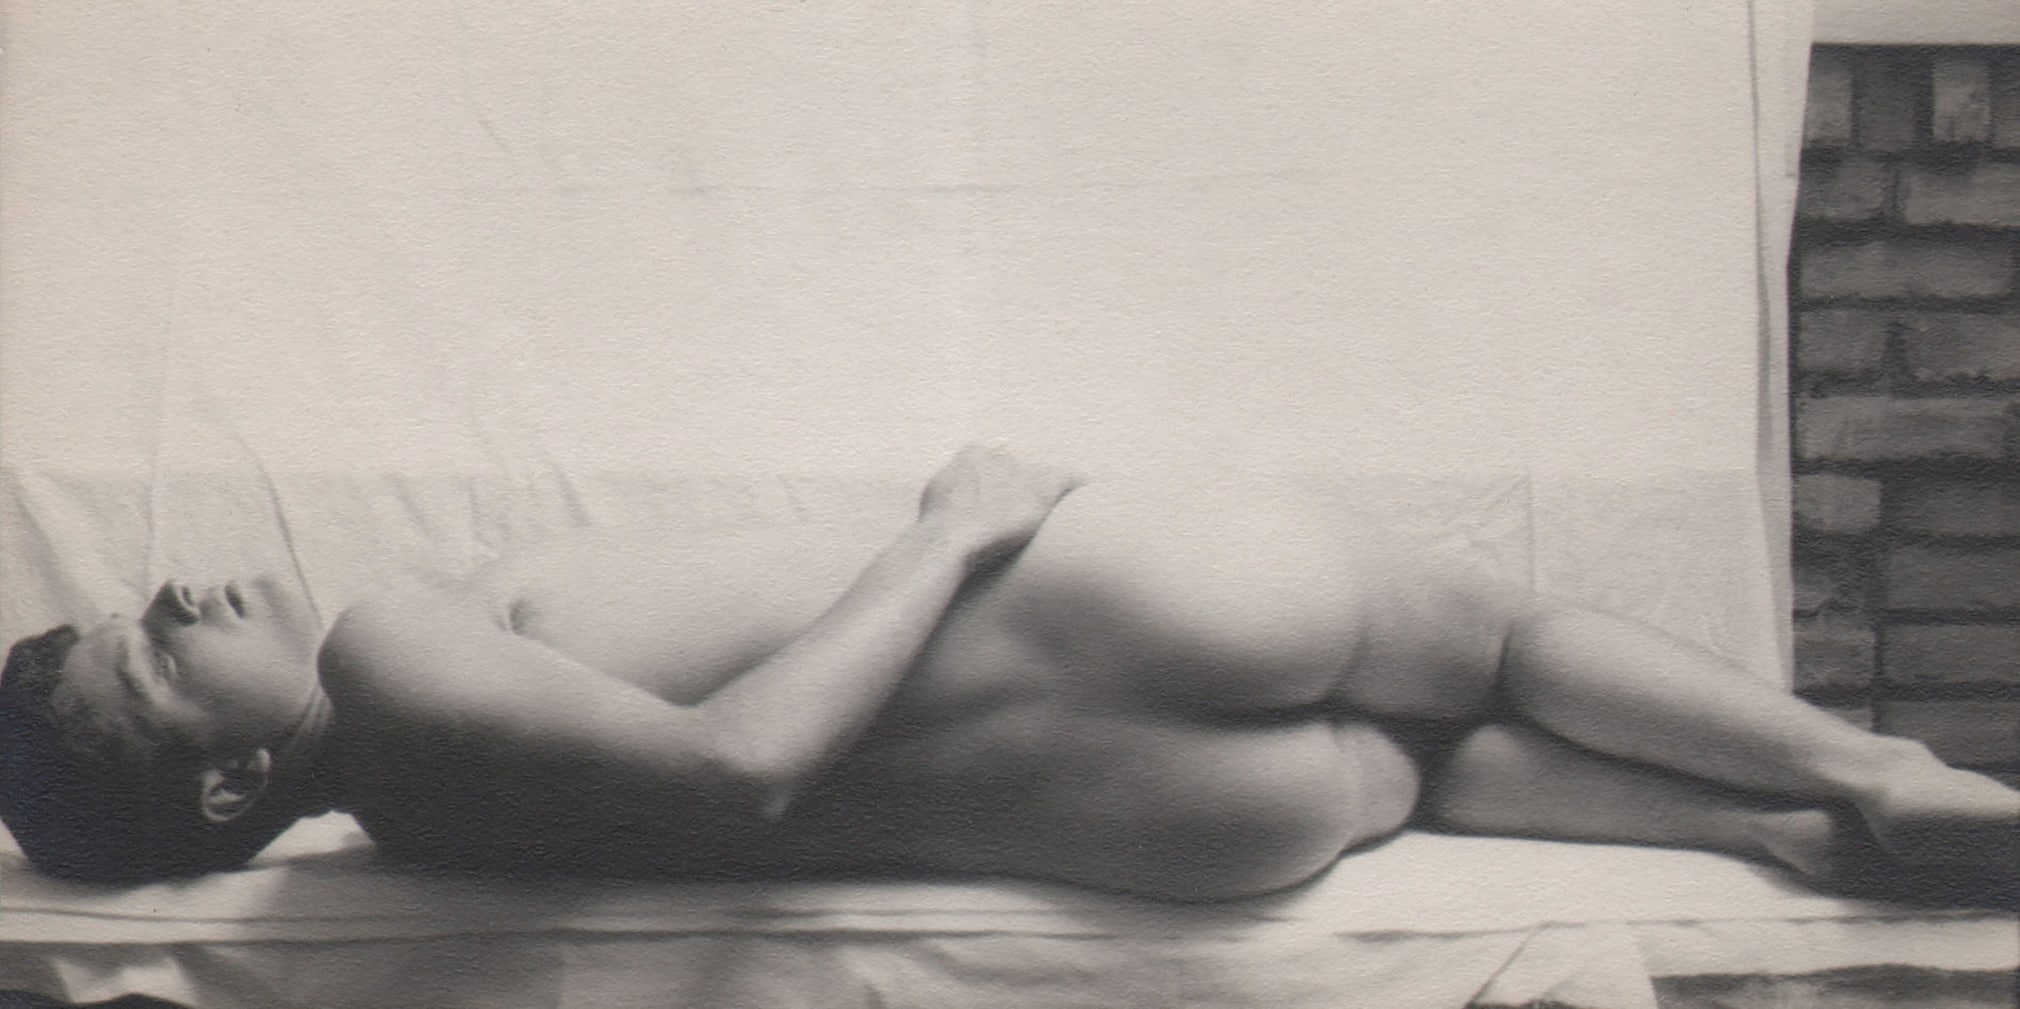 PaJaMa, Sandy Campbell, ​1943. Reclining male nude filling the lower portion of the horizontal frame against a white fabric backdrop. He lays on his side away from the camera, head turned upward.